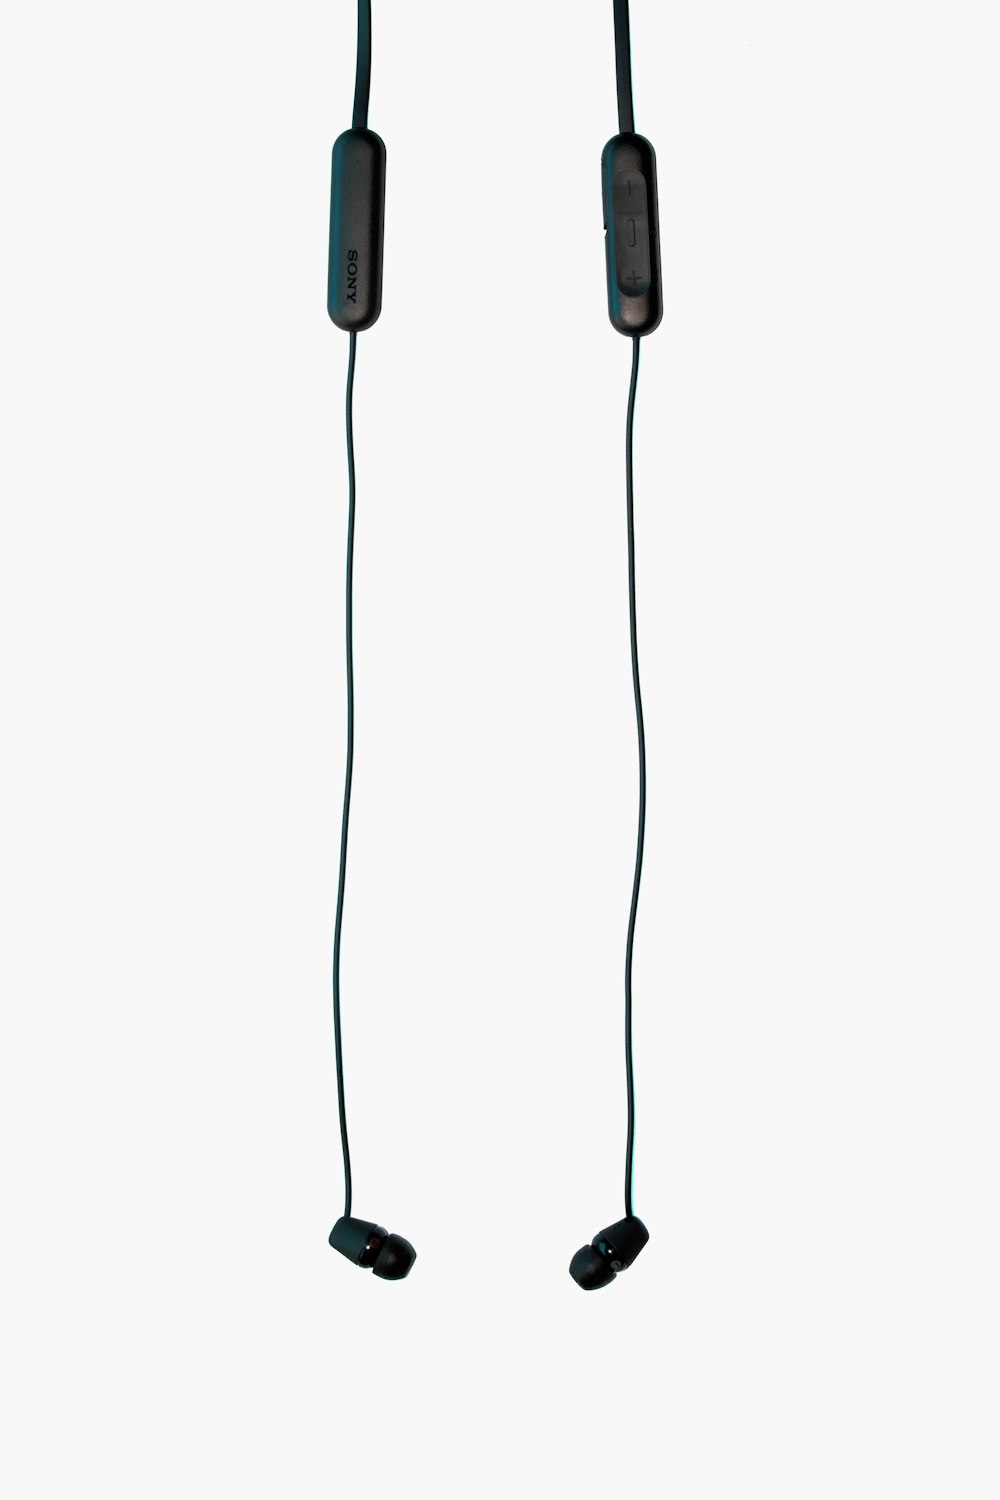 black corded earbuds on white surface